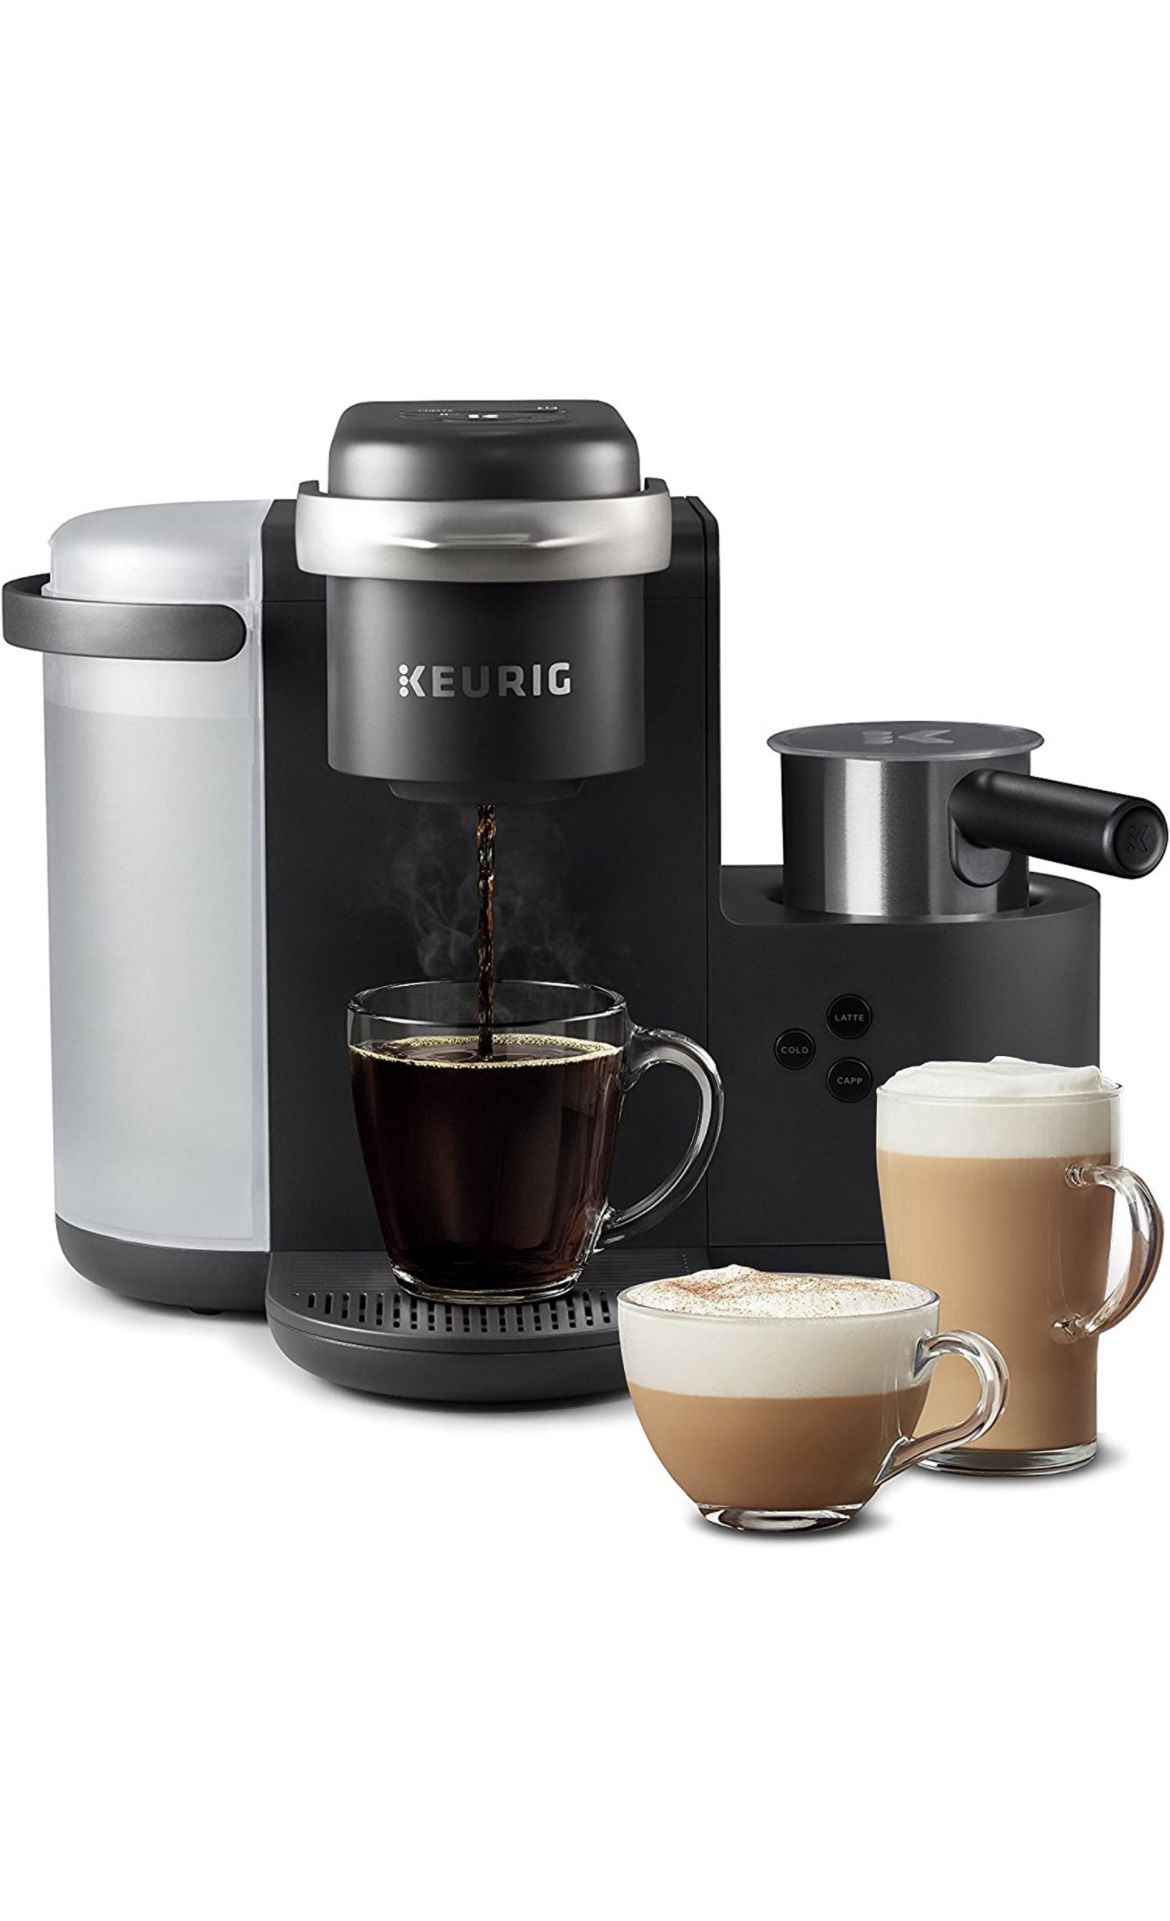 Keurig K-Cafe Single-Serve K-Cup Coffee Maker, Latte Maker and Cappuccino Maker, Comes with Dishwasher Safe Milk Frother, Coffee Shot Capability, Comp